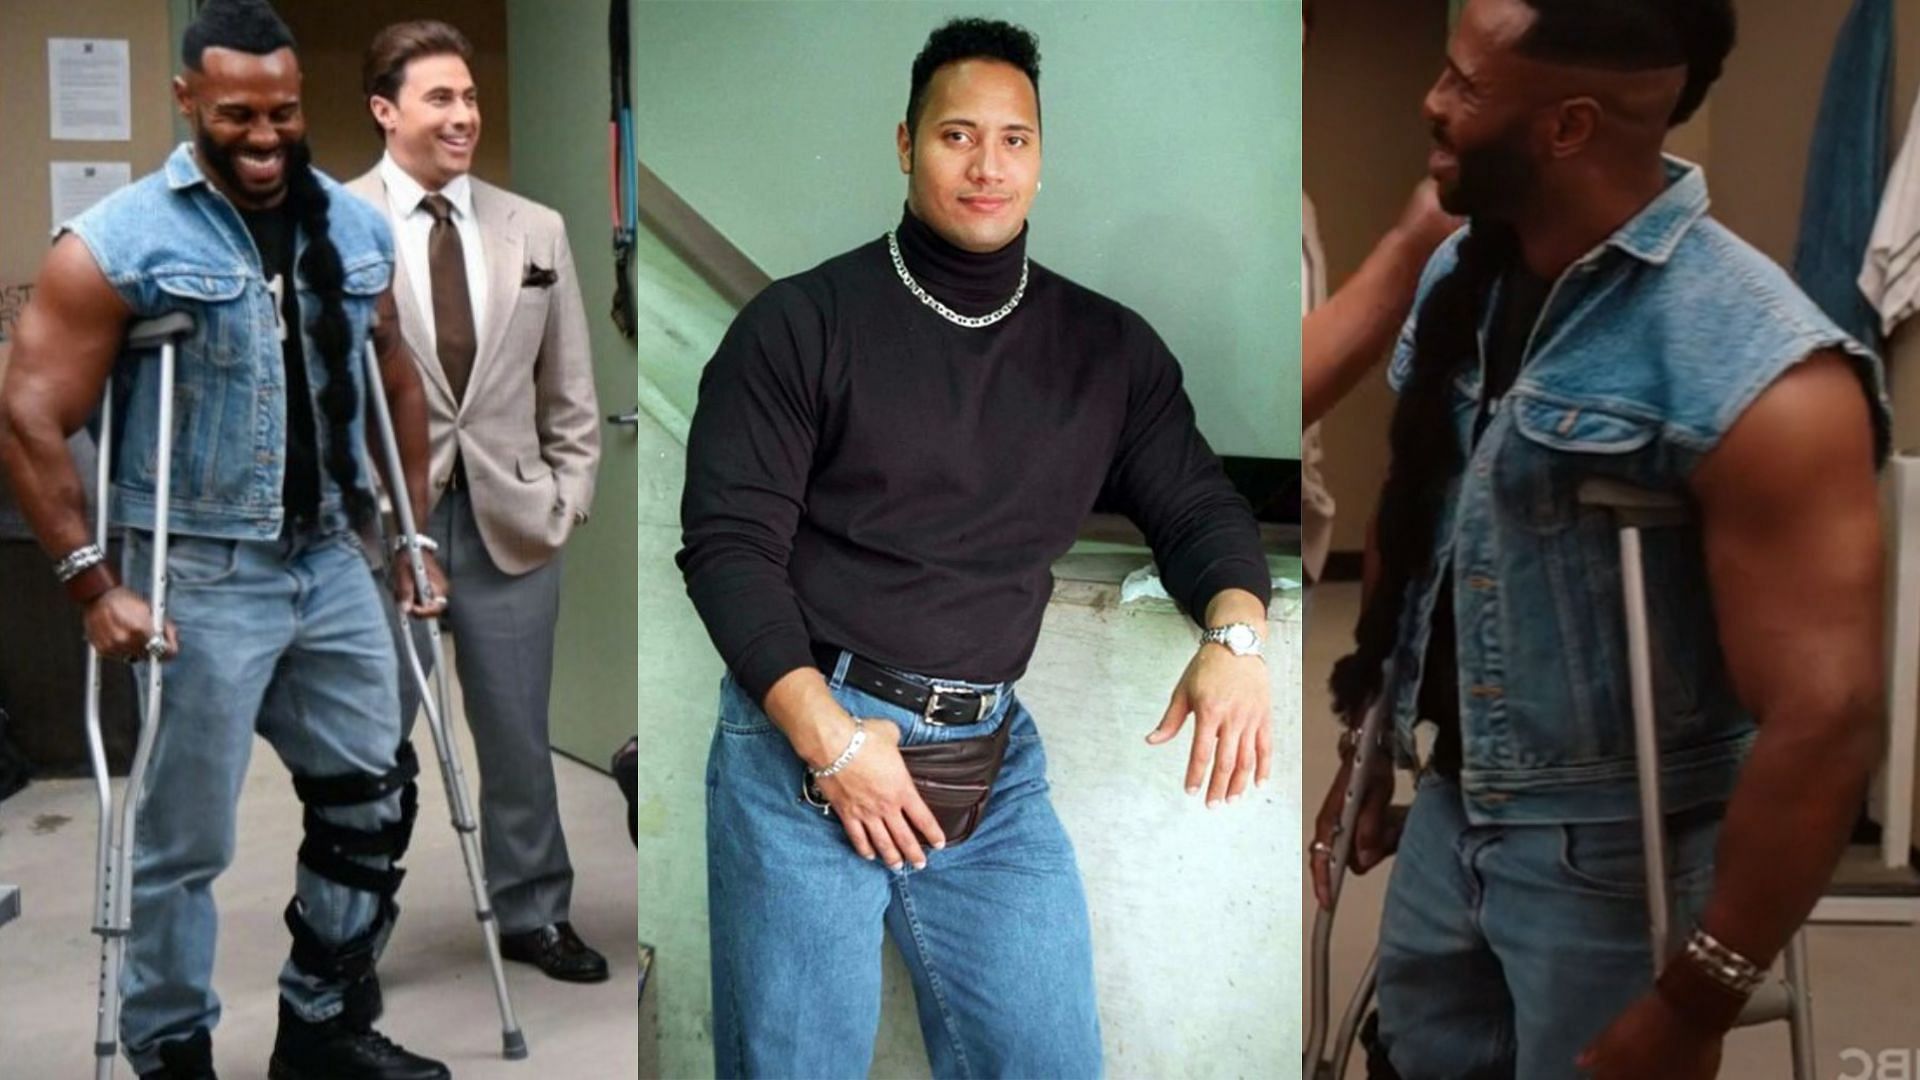 Chad Frost has semblance to Dwayne Johnson